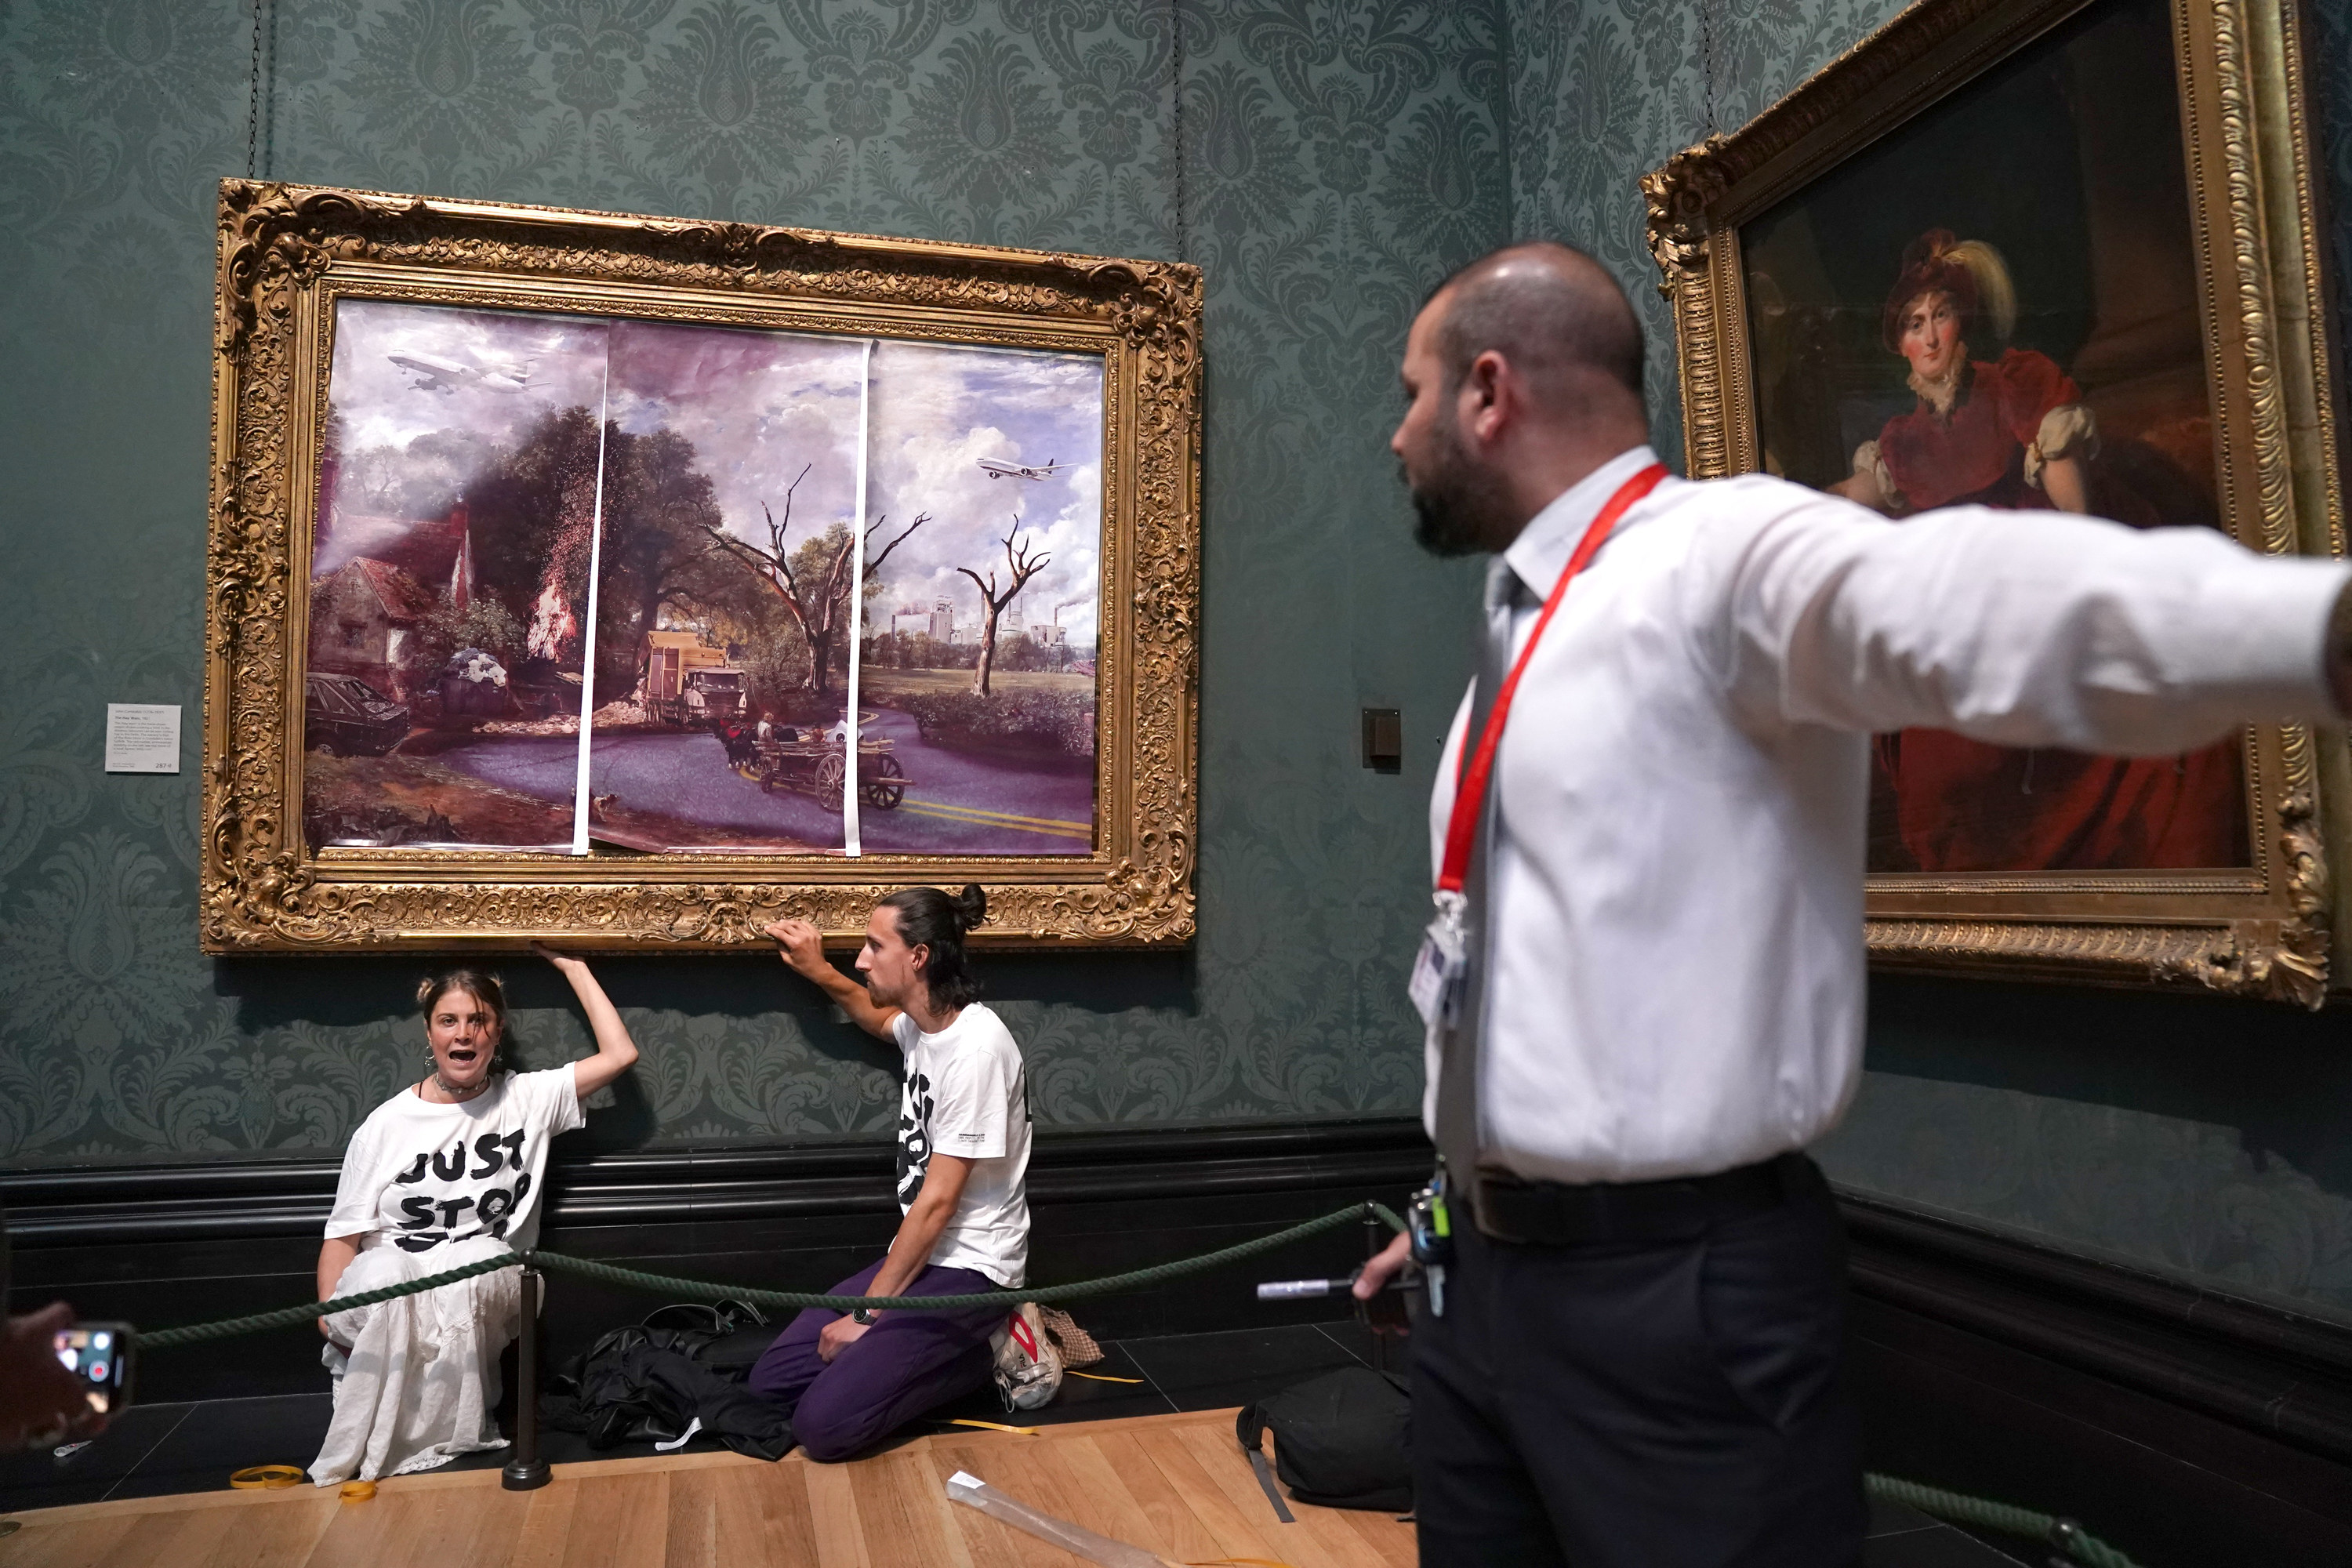 Climate Activists Glue Their Hands To Famous Paintings In Protest